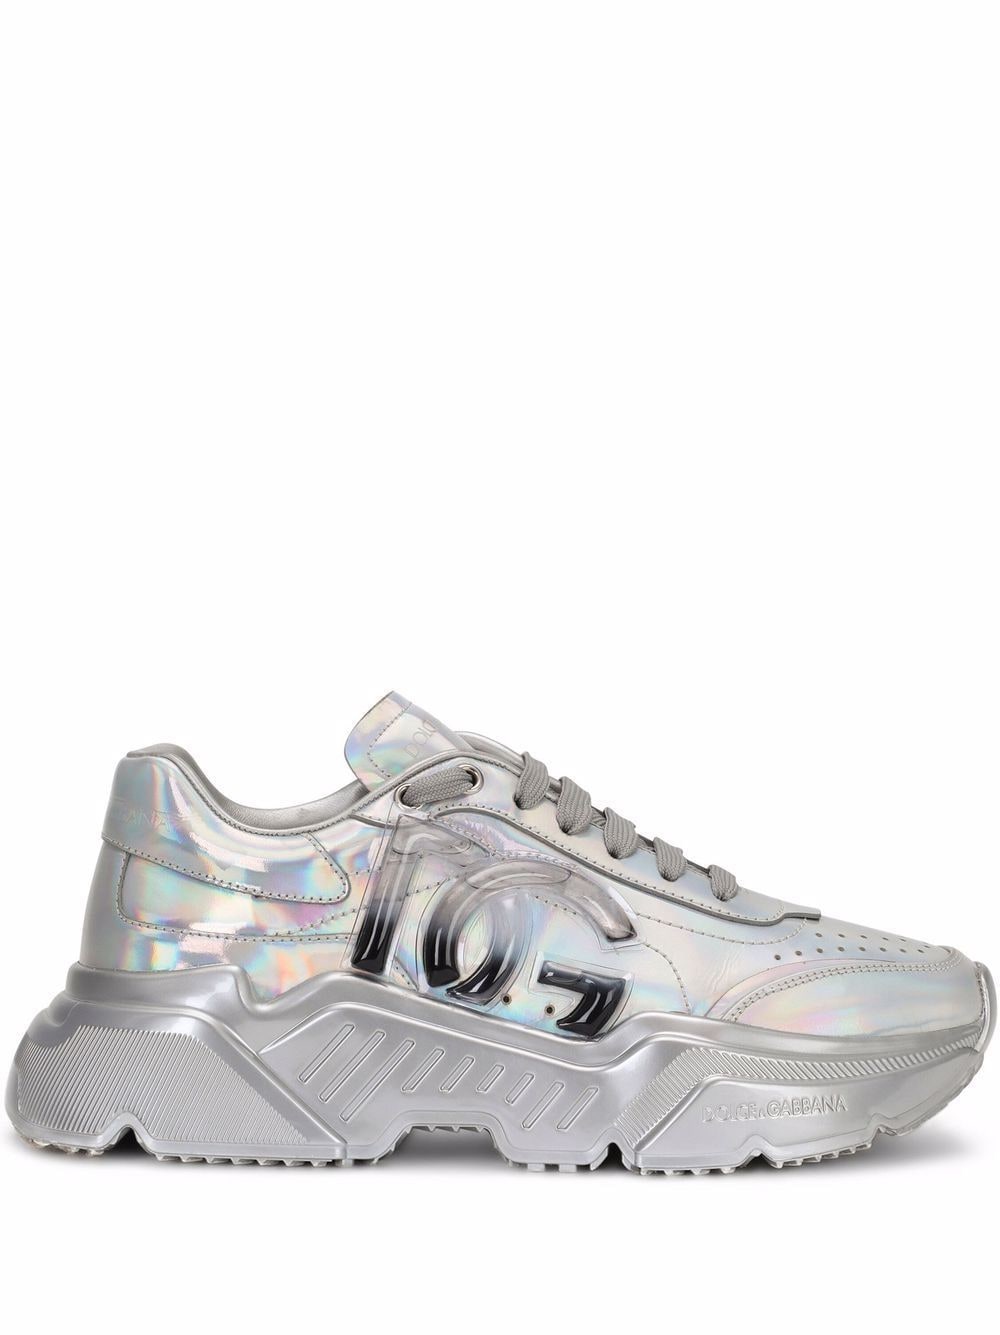 holographic-effect lace-up sneakers | Dolce & Gabbana | Eraldo.com